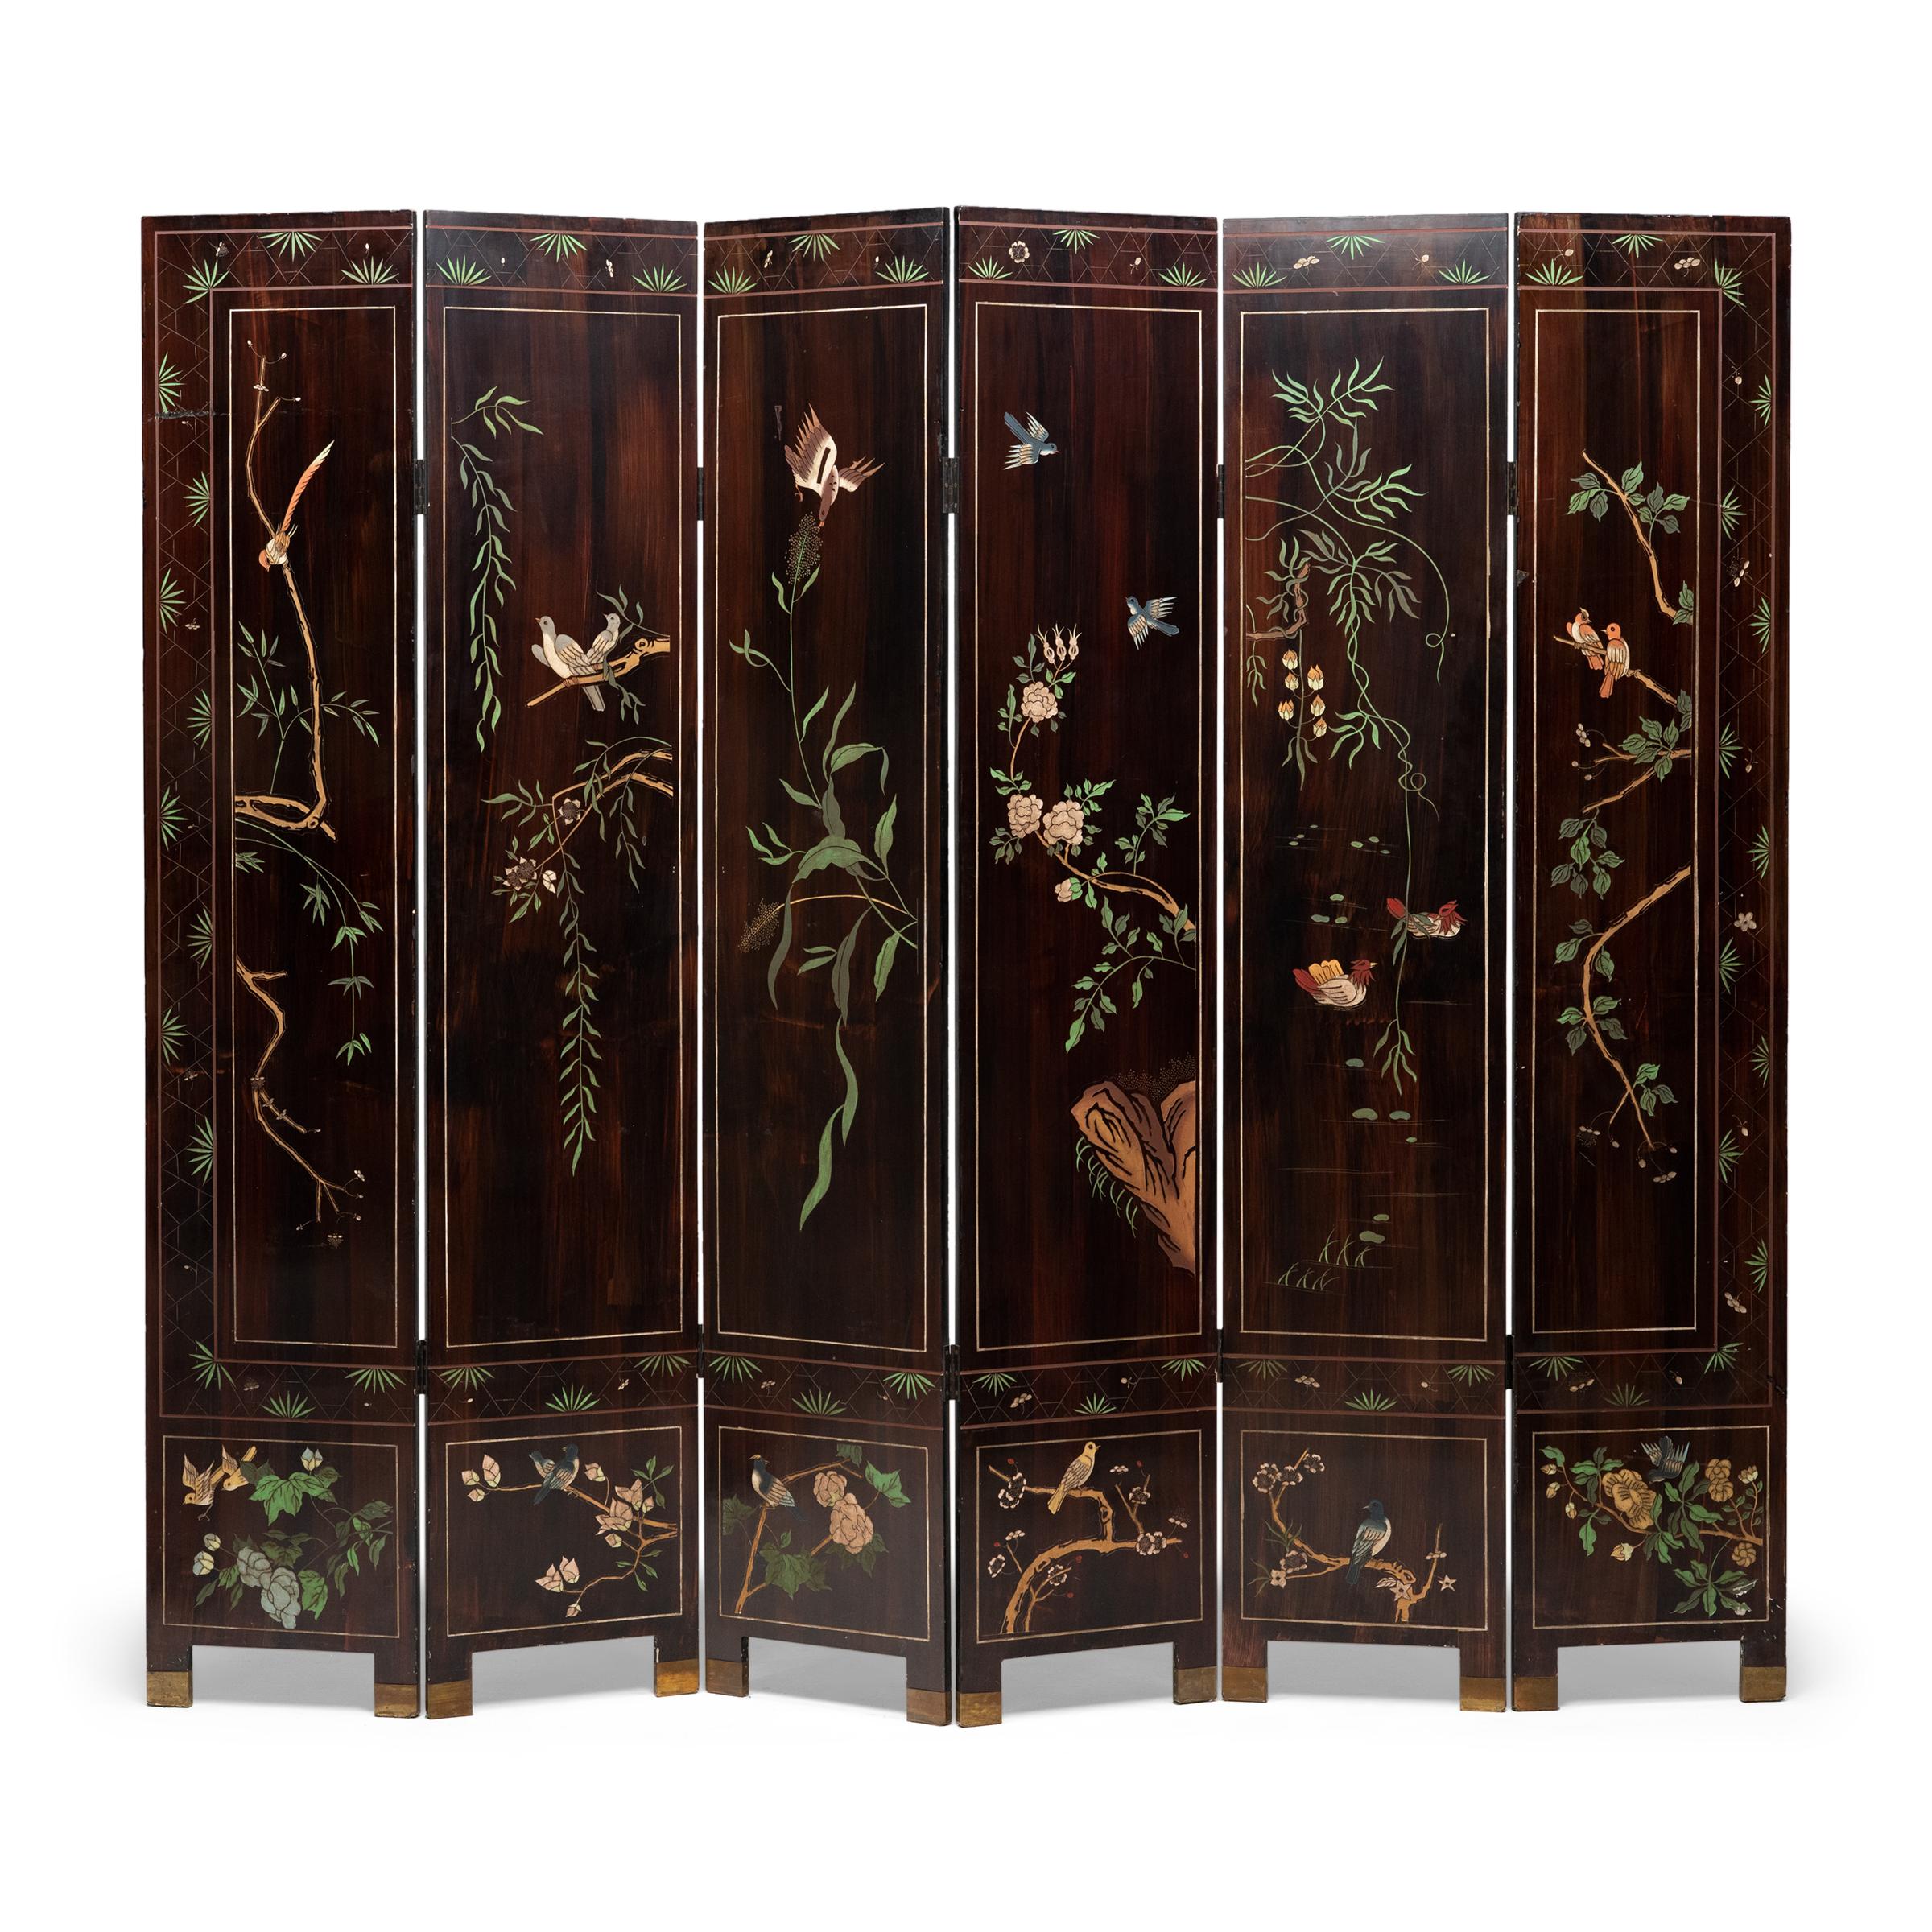 This coromandel lacquer screen is incised with colorful scenery depicting idyllic courtly life in a palace complex. Finely dressed ladies and their female attendants stroll throughout a grand enclosed courtyard of elaborate pavilions and low